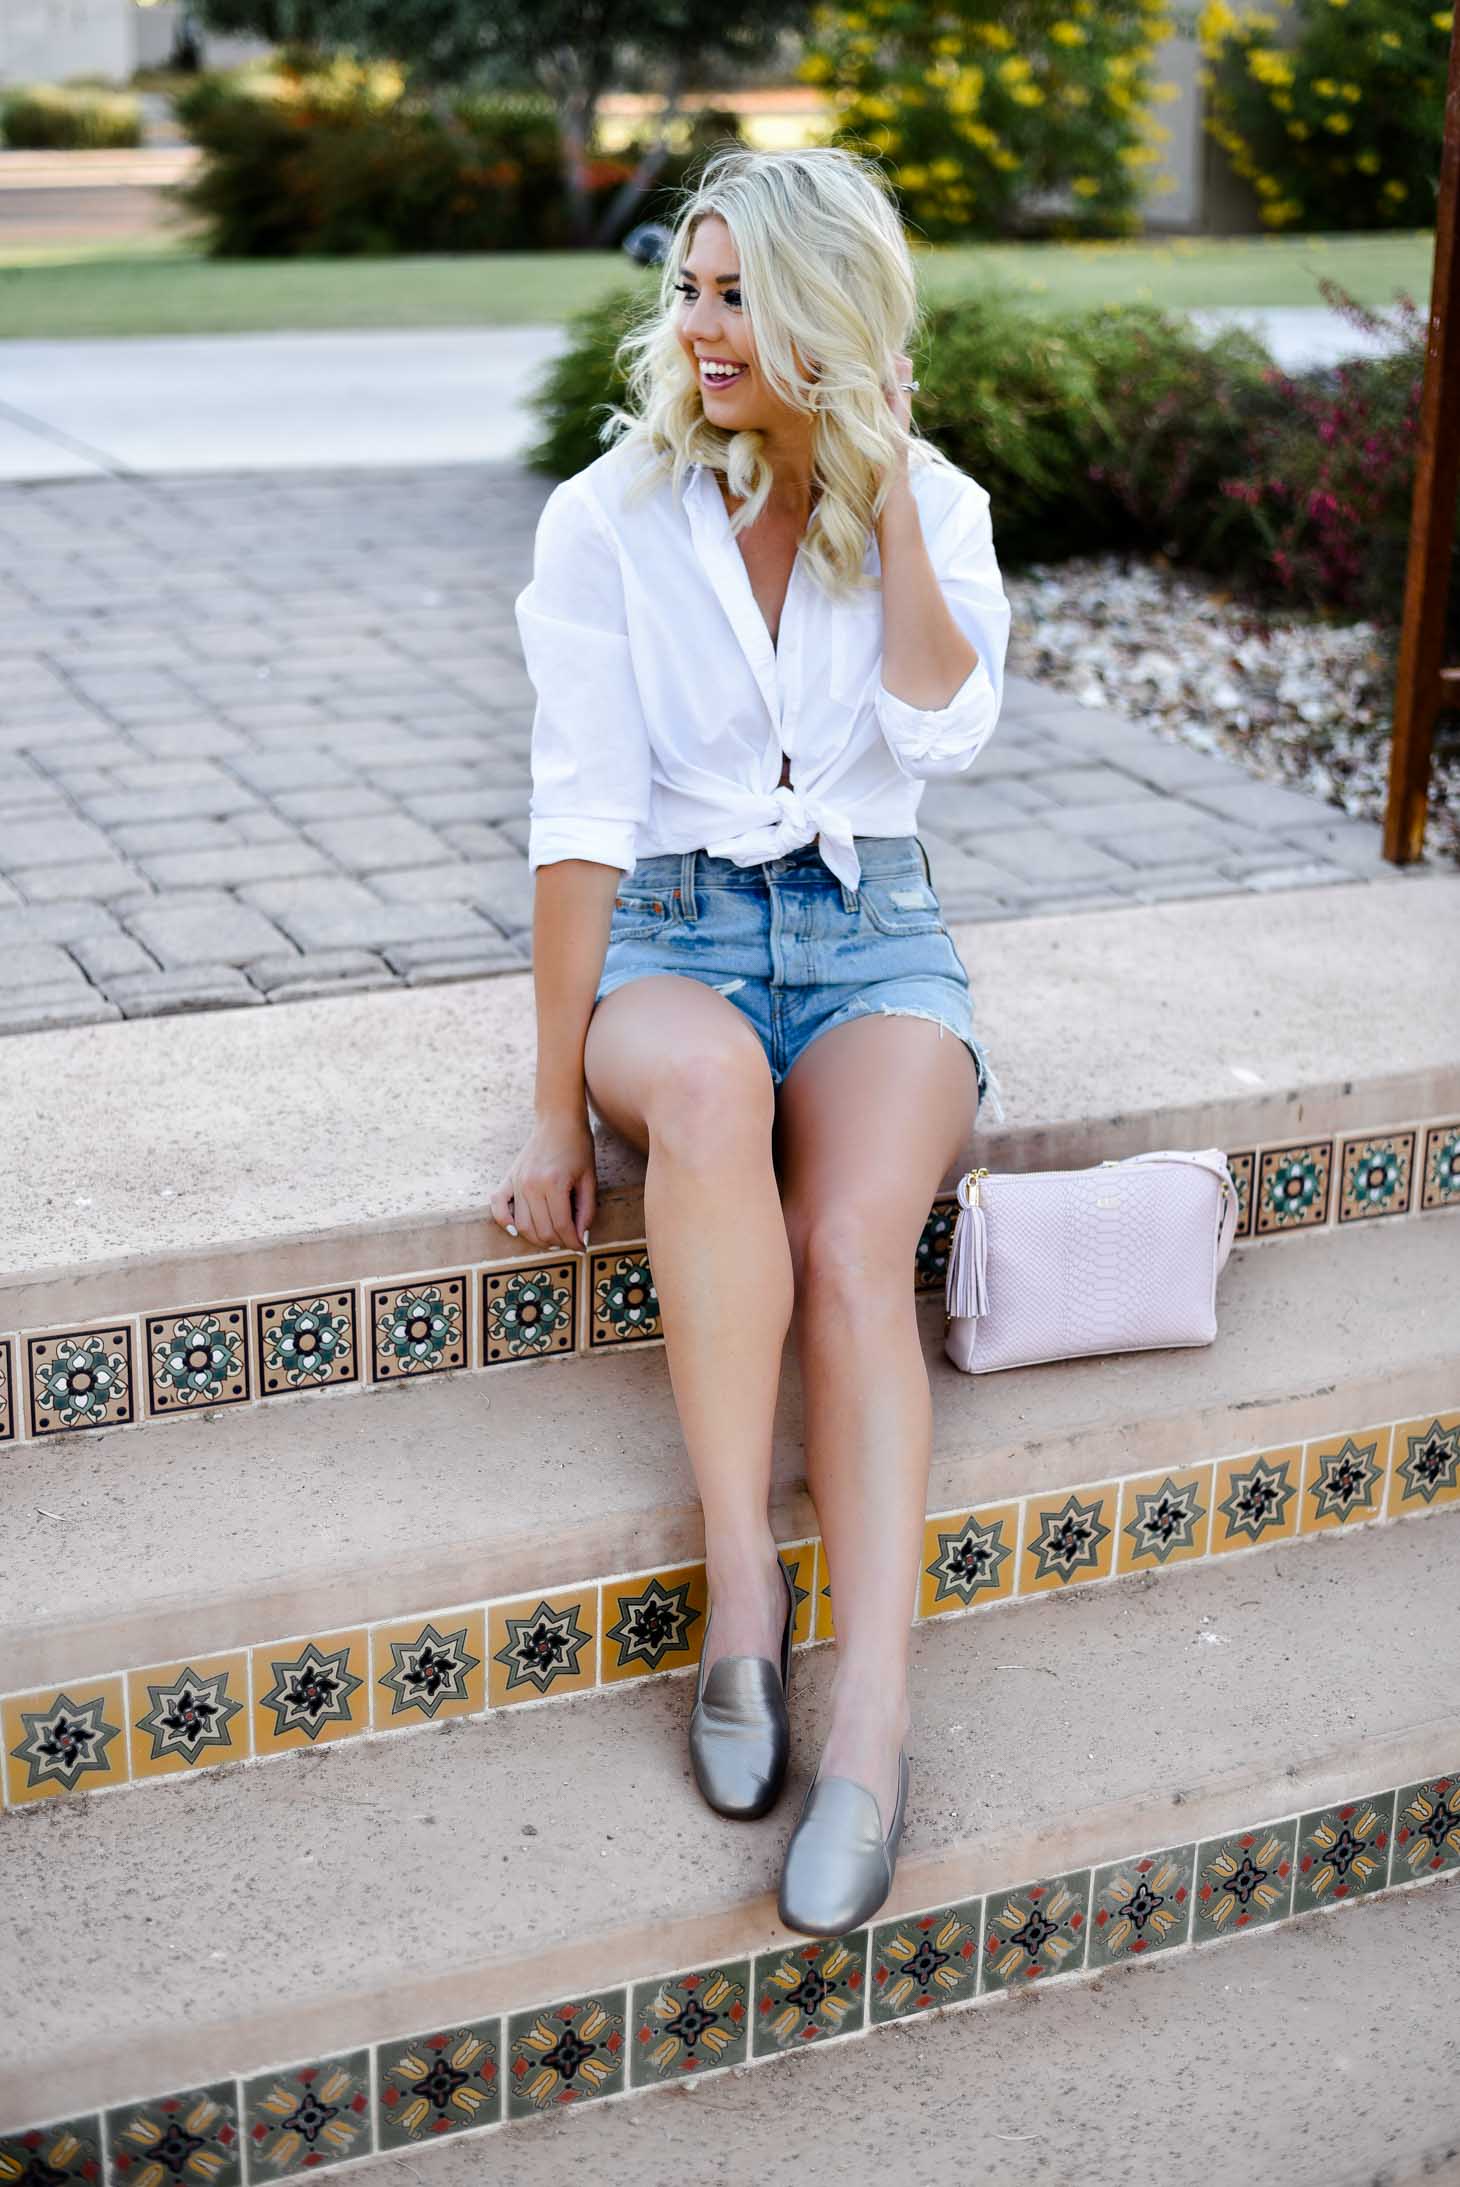 Erin Elizabeth of Wink and a Twirl shares this summer style featuring the Emiline shoe by Naturalizer